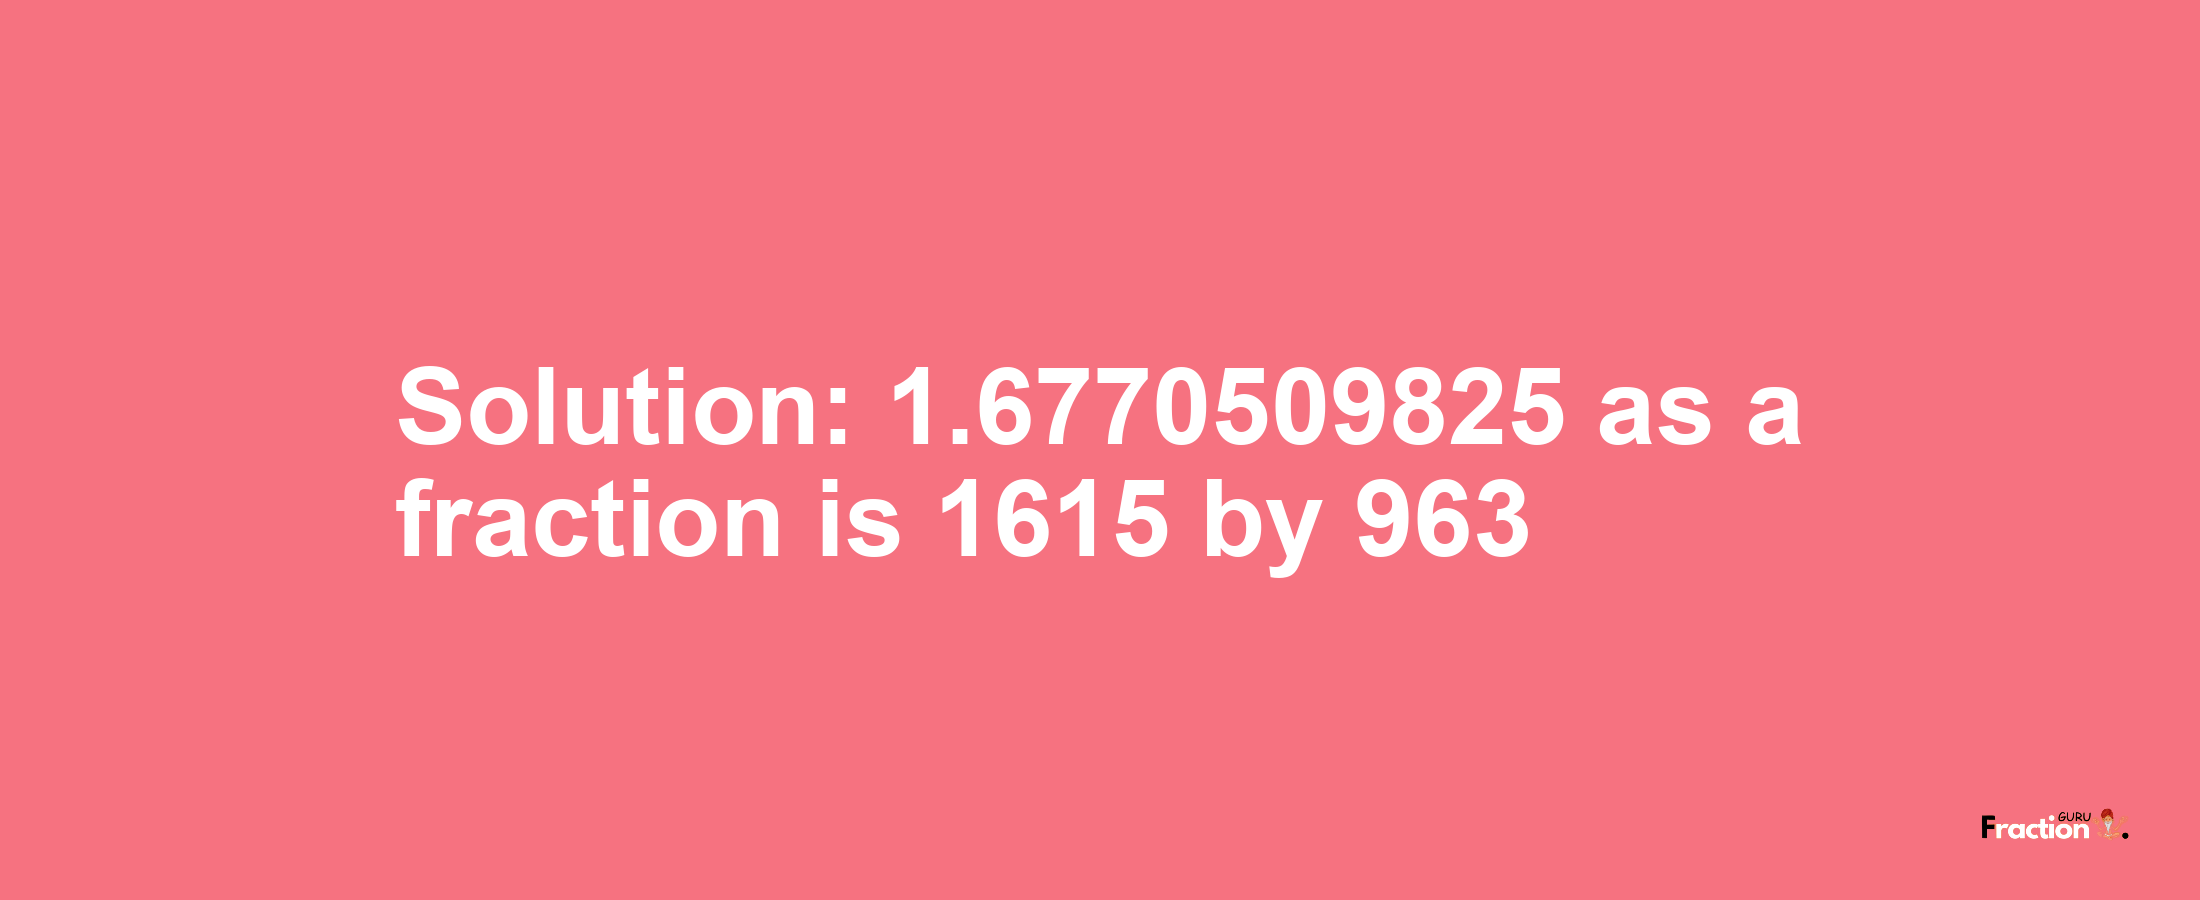 Solution:1.6770509825 as a fraction is 1615/963